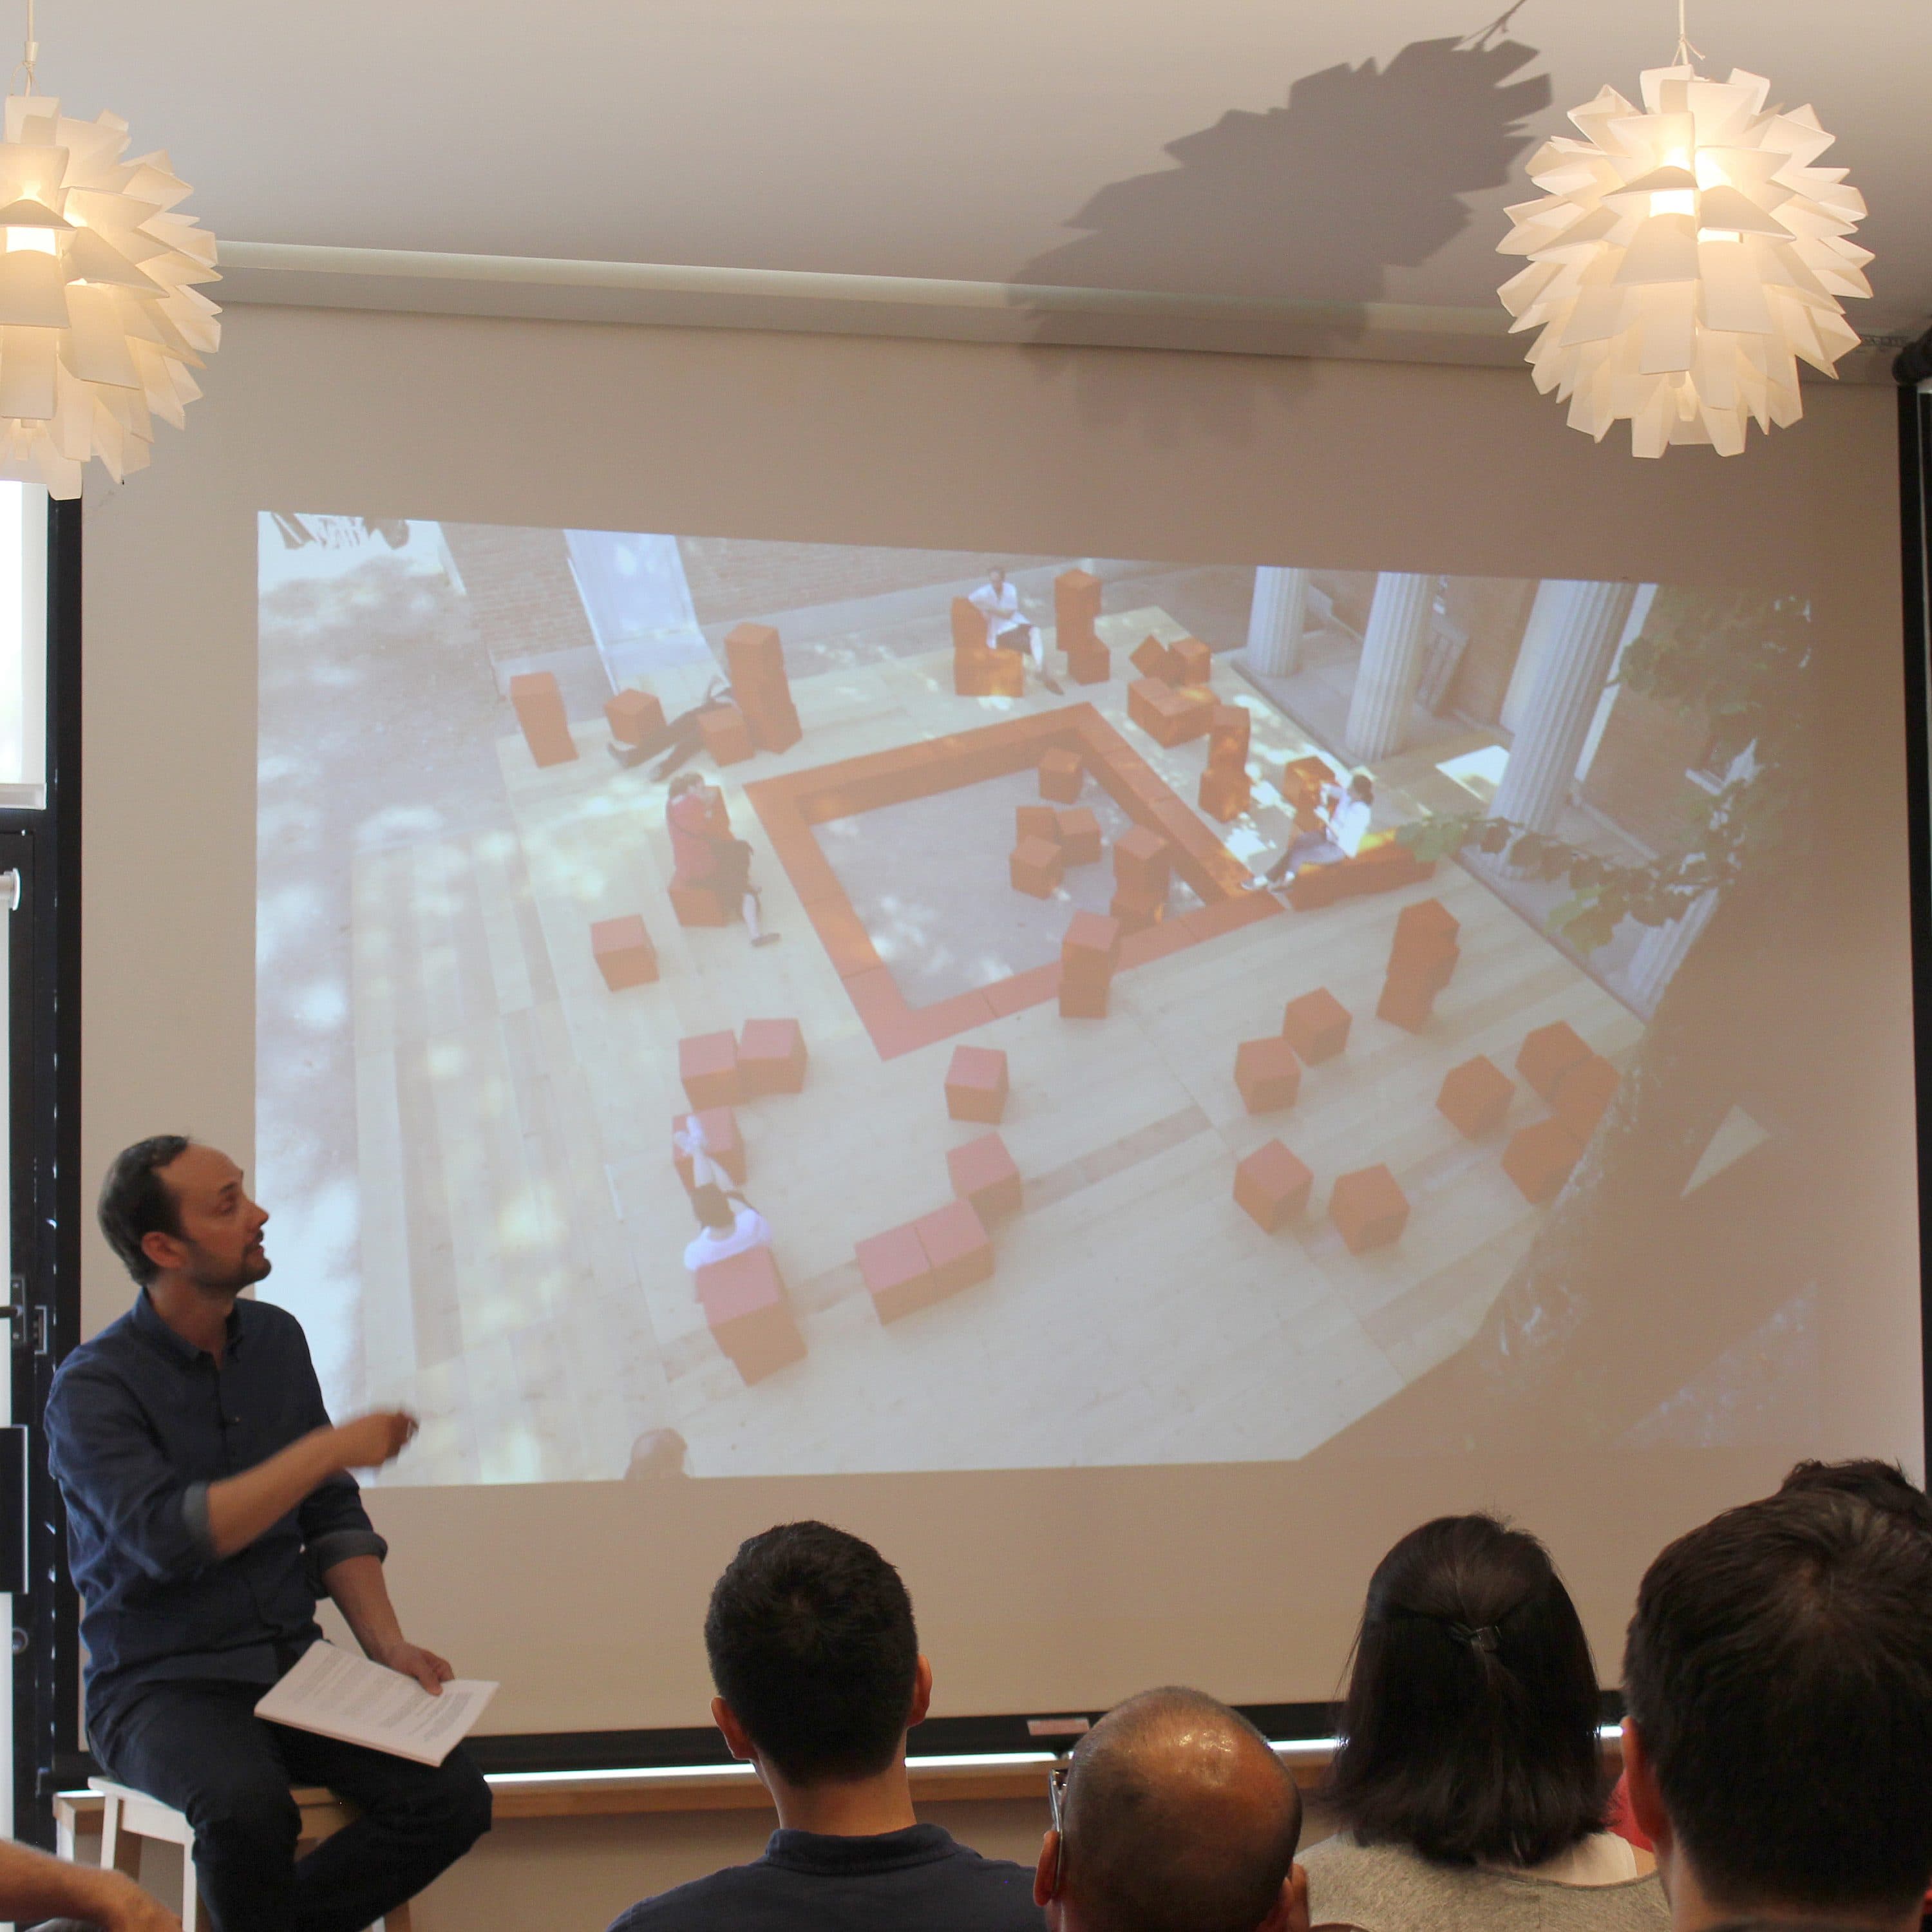 A man is presenting to an audience using a large screen. The screen displays an image of an outdoor scene with people interacting with brown block-like structures arranged in a square. The room has two decorative hanging lights and brick walls.